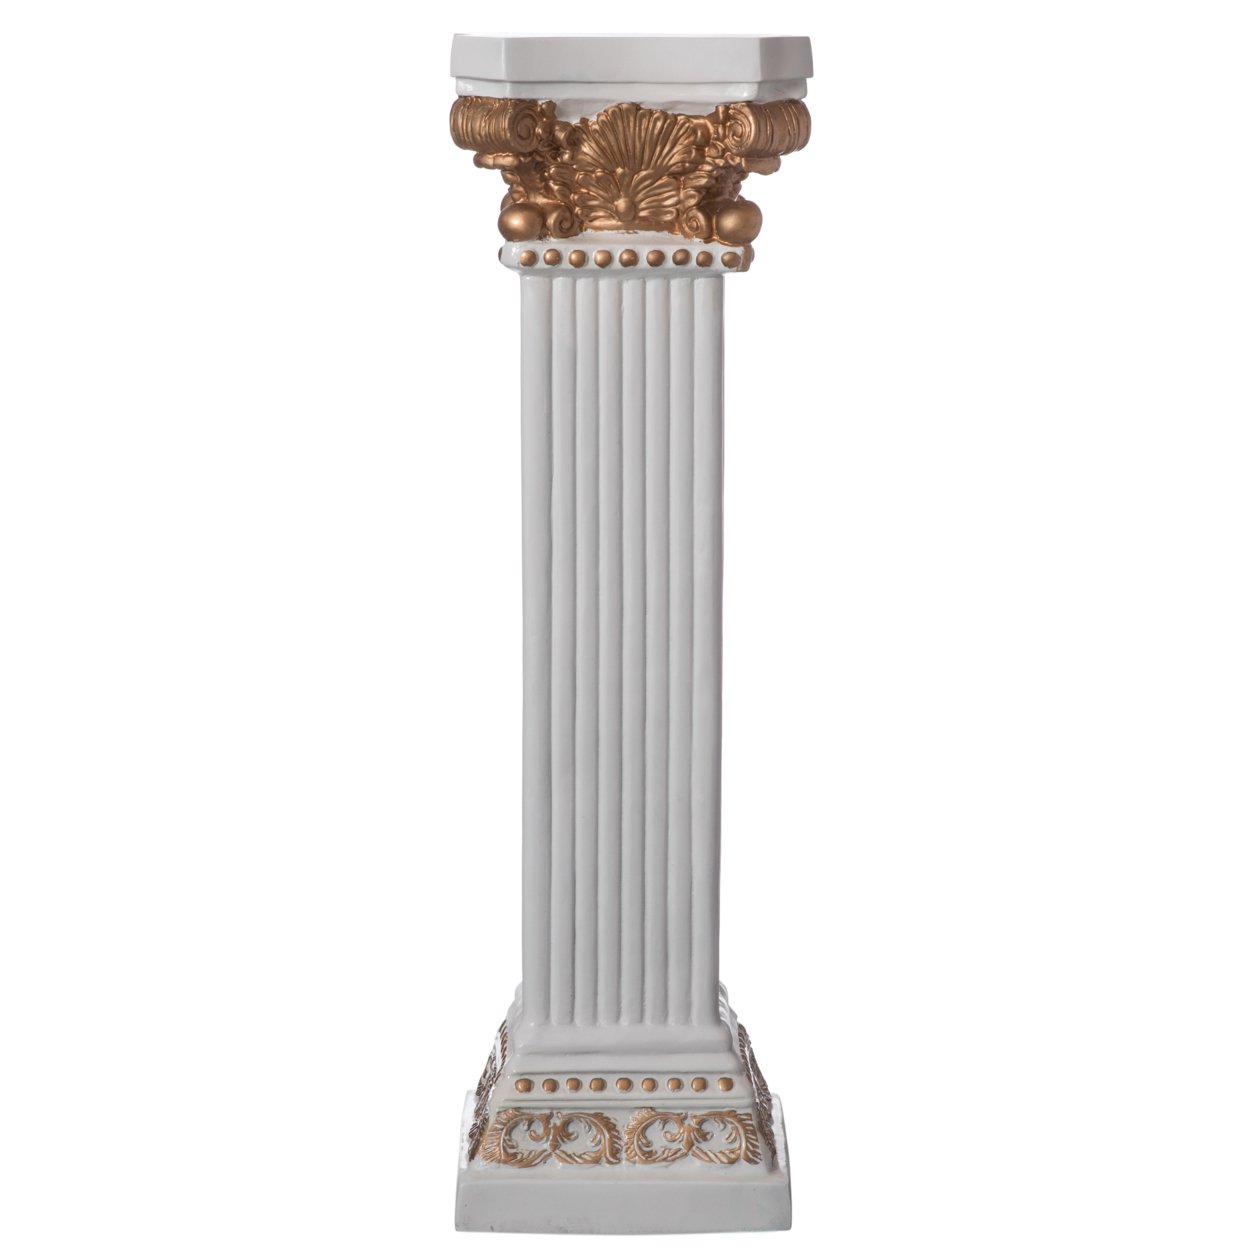 Decorative Modern Fiberglass White And Gold Plinth Roman Style Column Ionic Pedestal Vase Stand For Wedding, Living Room, Or Dining Room - 4